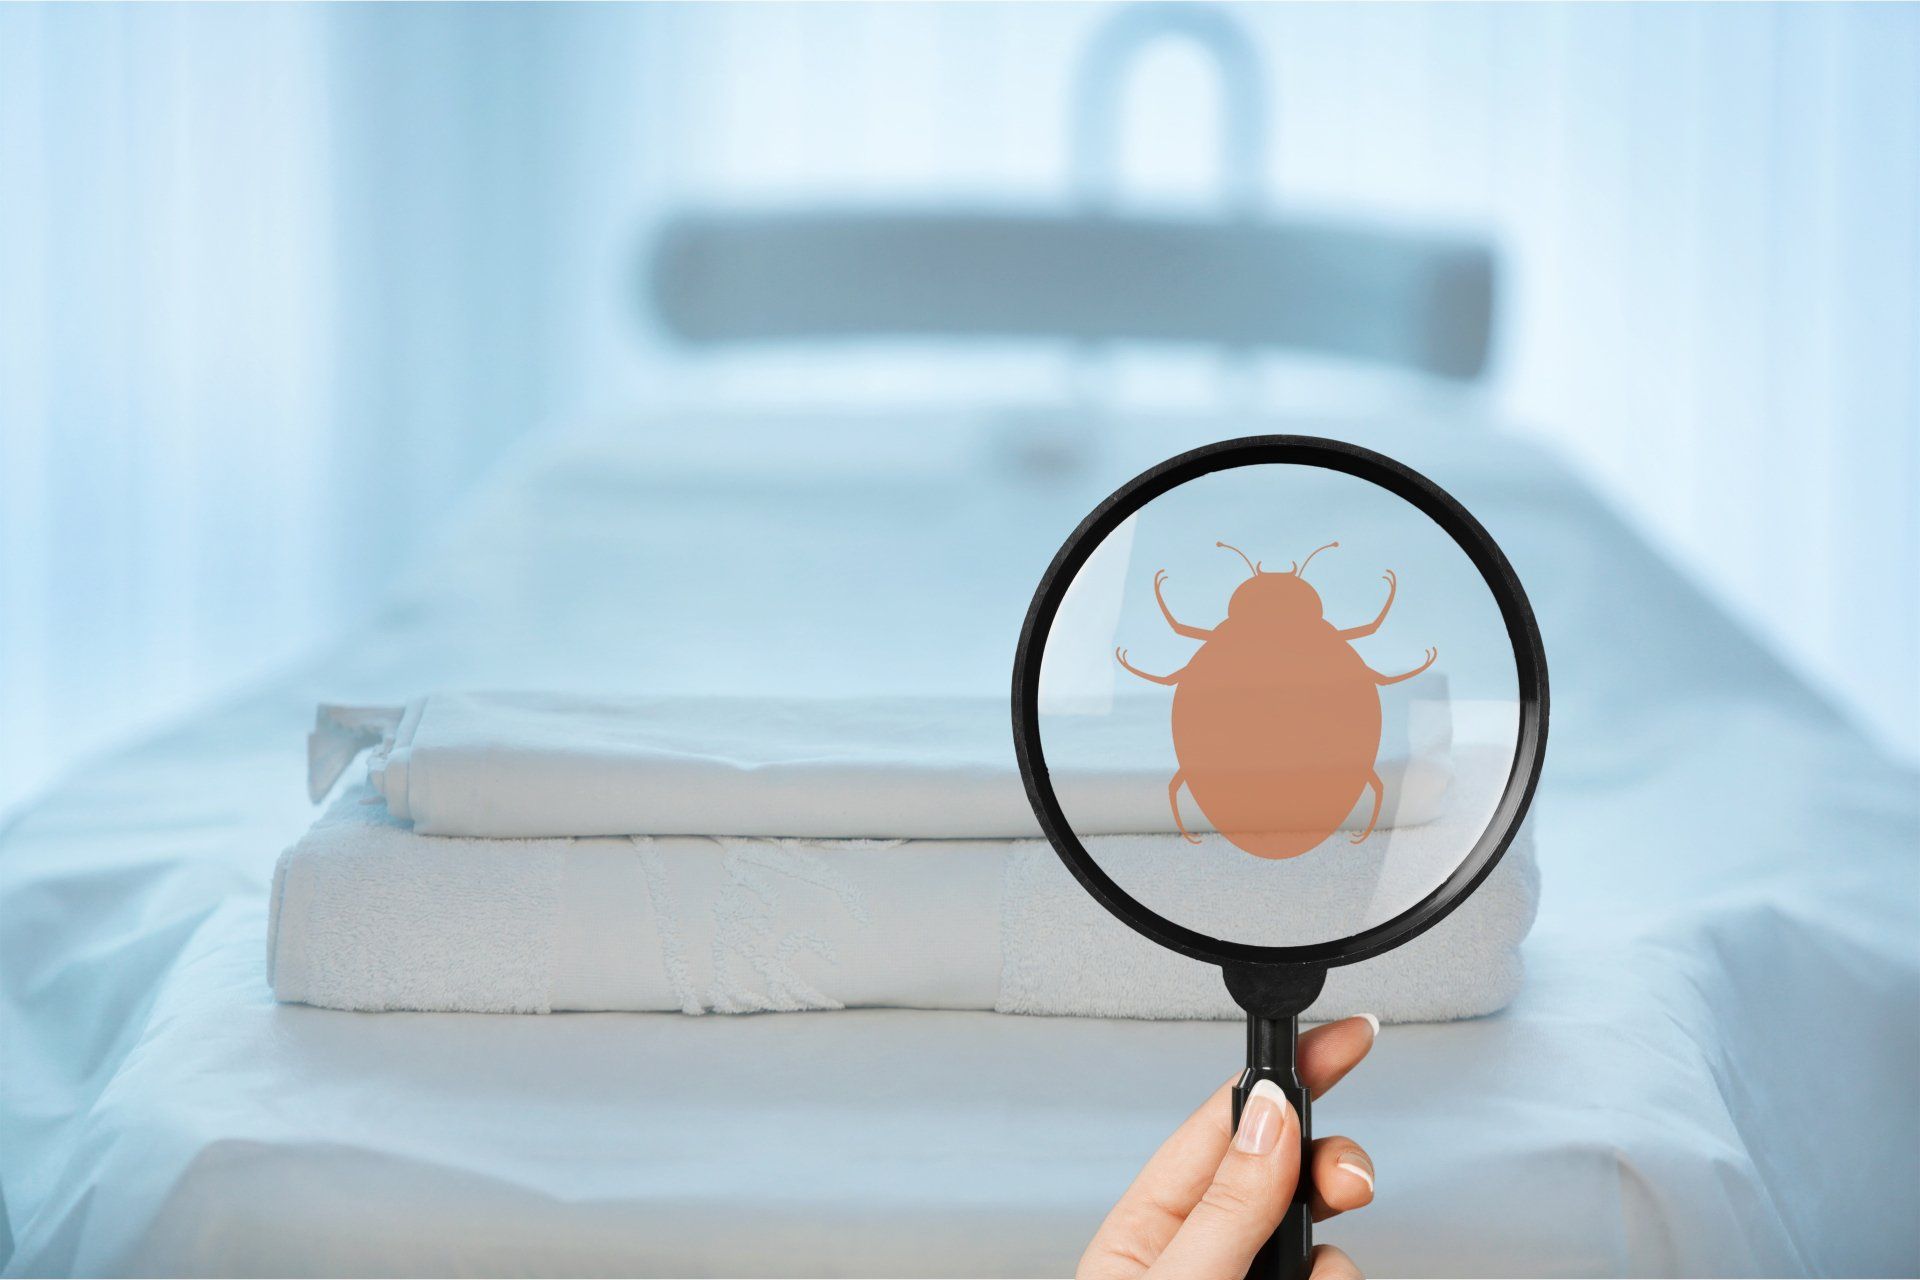 bed bug inspection to detect bed bugs in hotel.